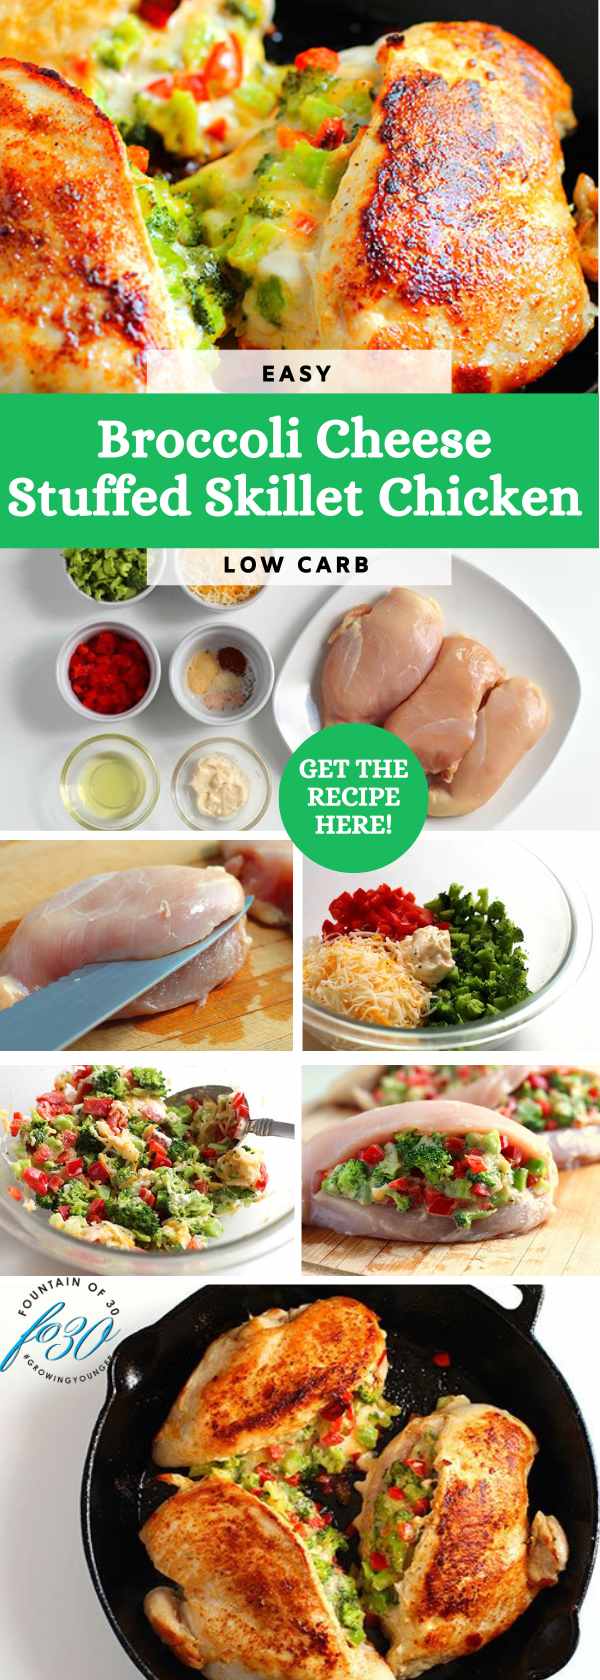 low carb broccoli cheese stuffed chicken fountainof30